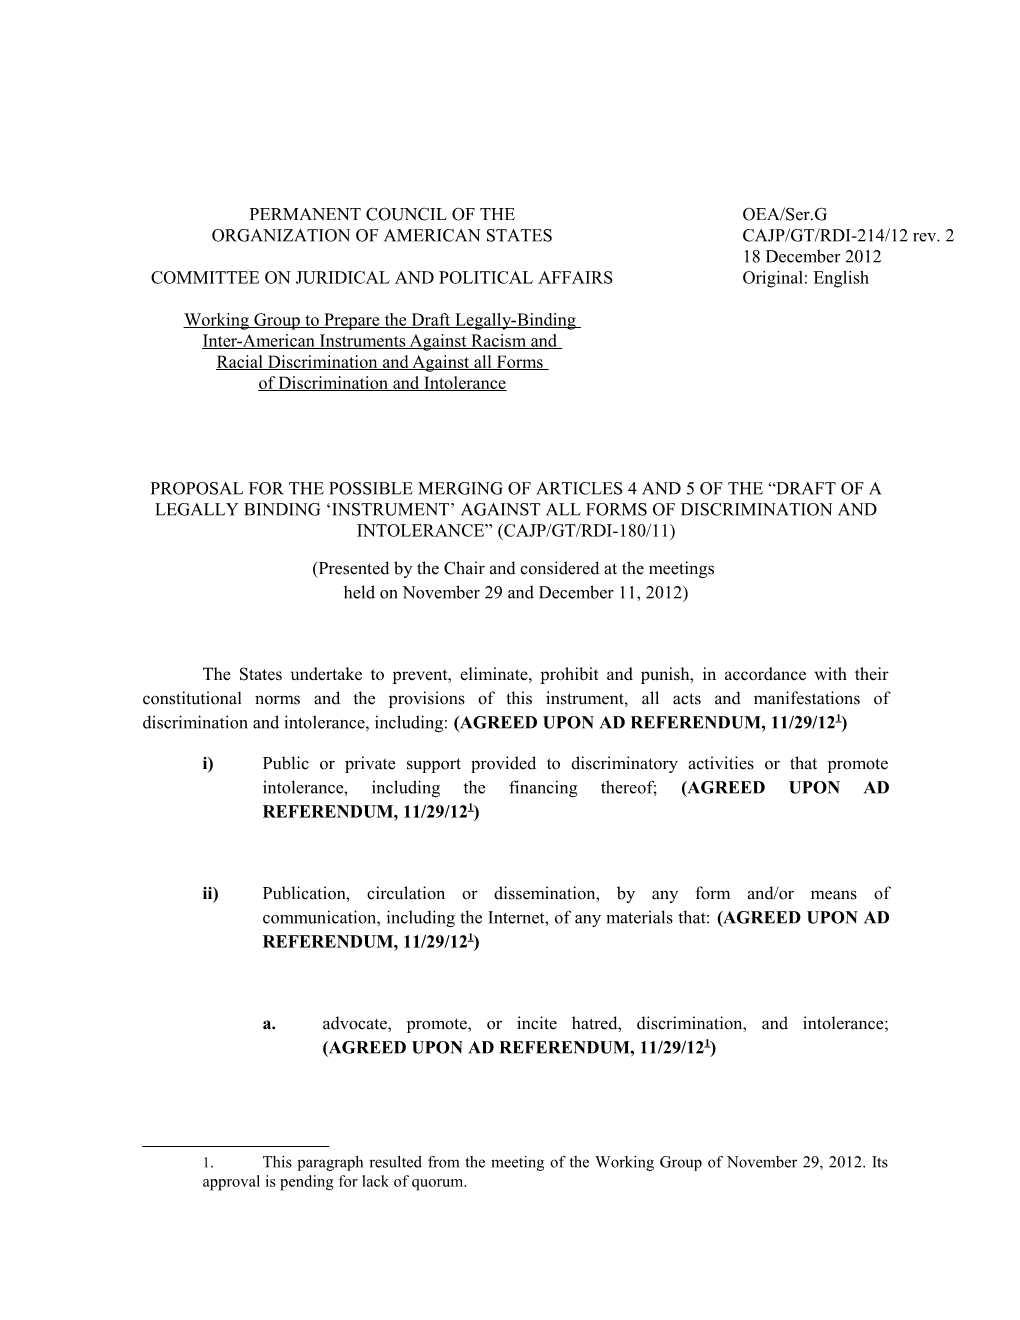 Proposal of the Possible Merging of Articles 4 and 5 of the Draft of a Legally Binding